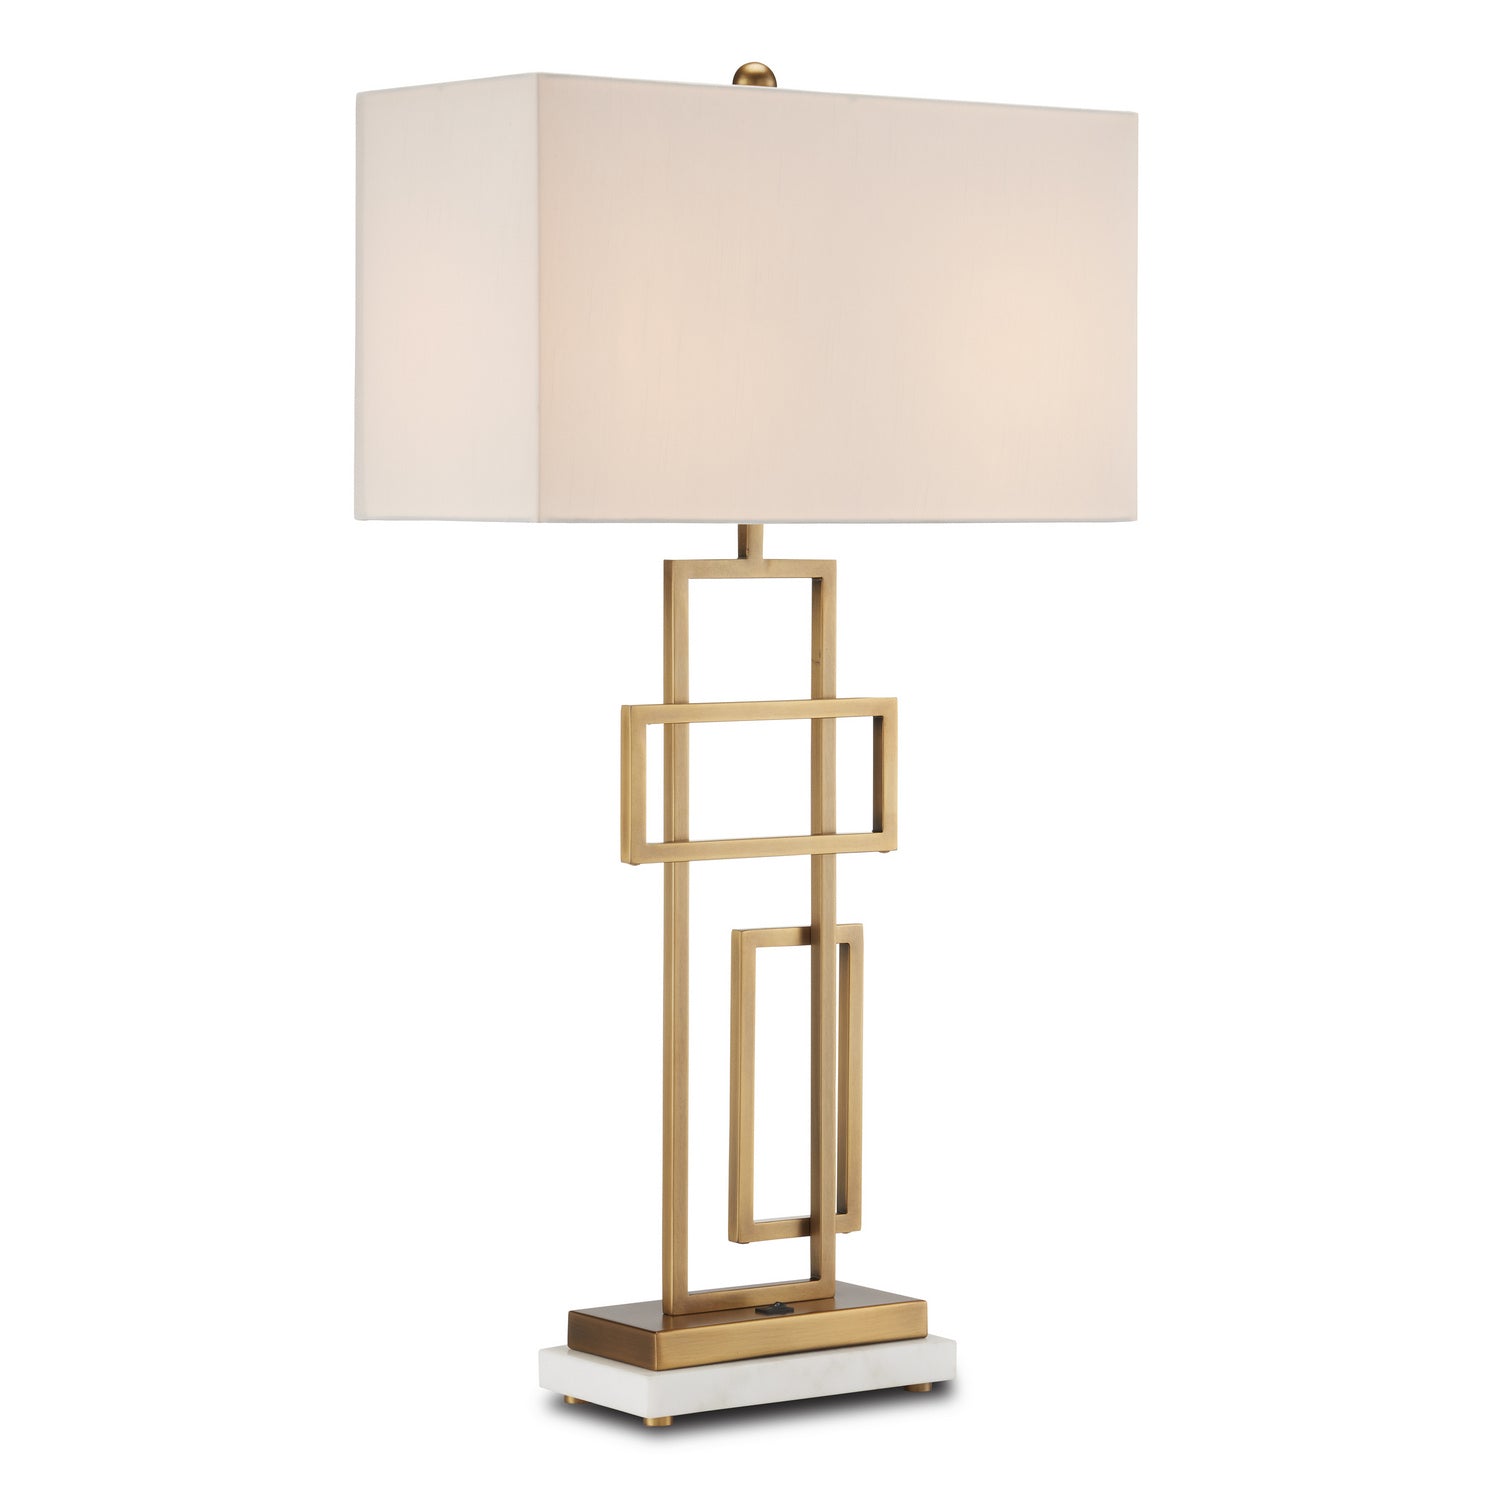 Currey and Company - 6000-0834 - Two Light Table Lamp - Parallelogram - Antique Brass/White